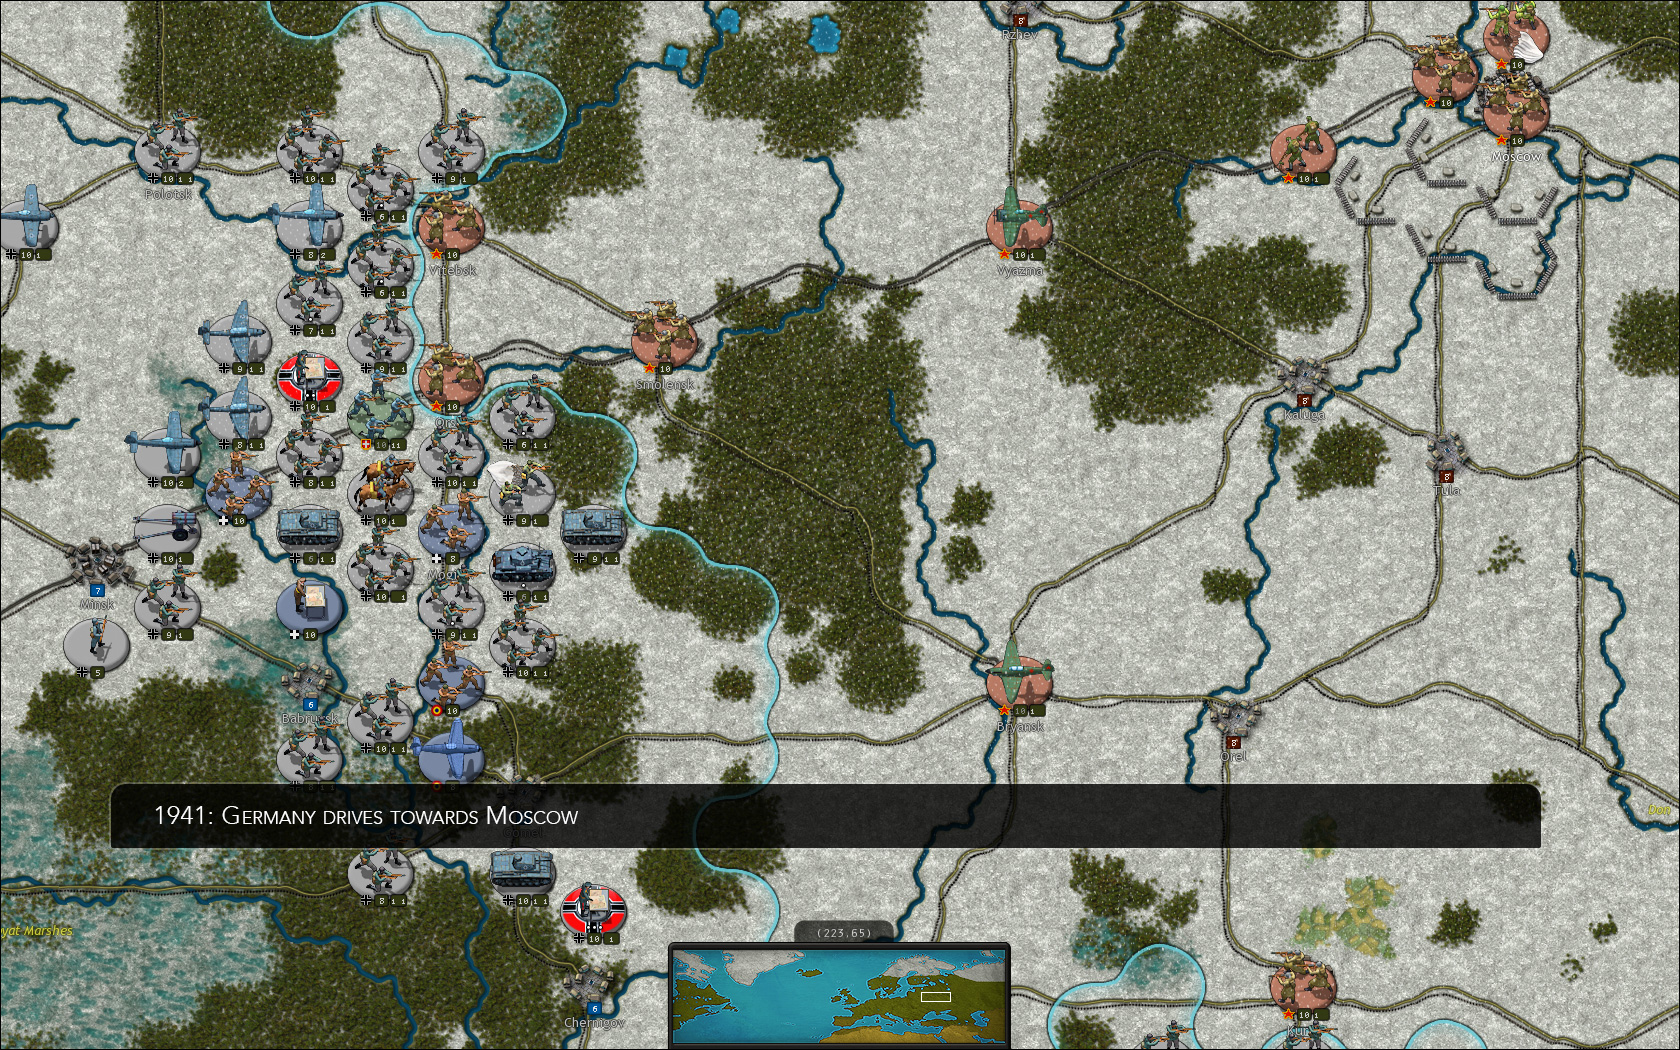 Strategic Command WWII: War in Europe Free Download